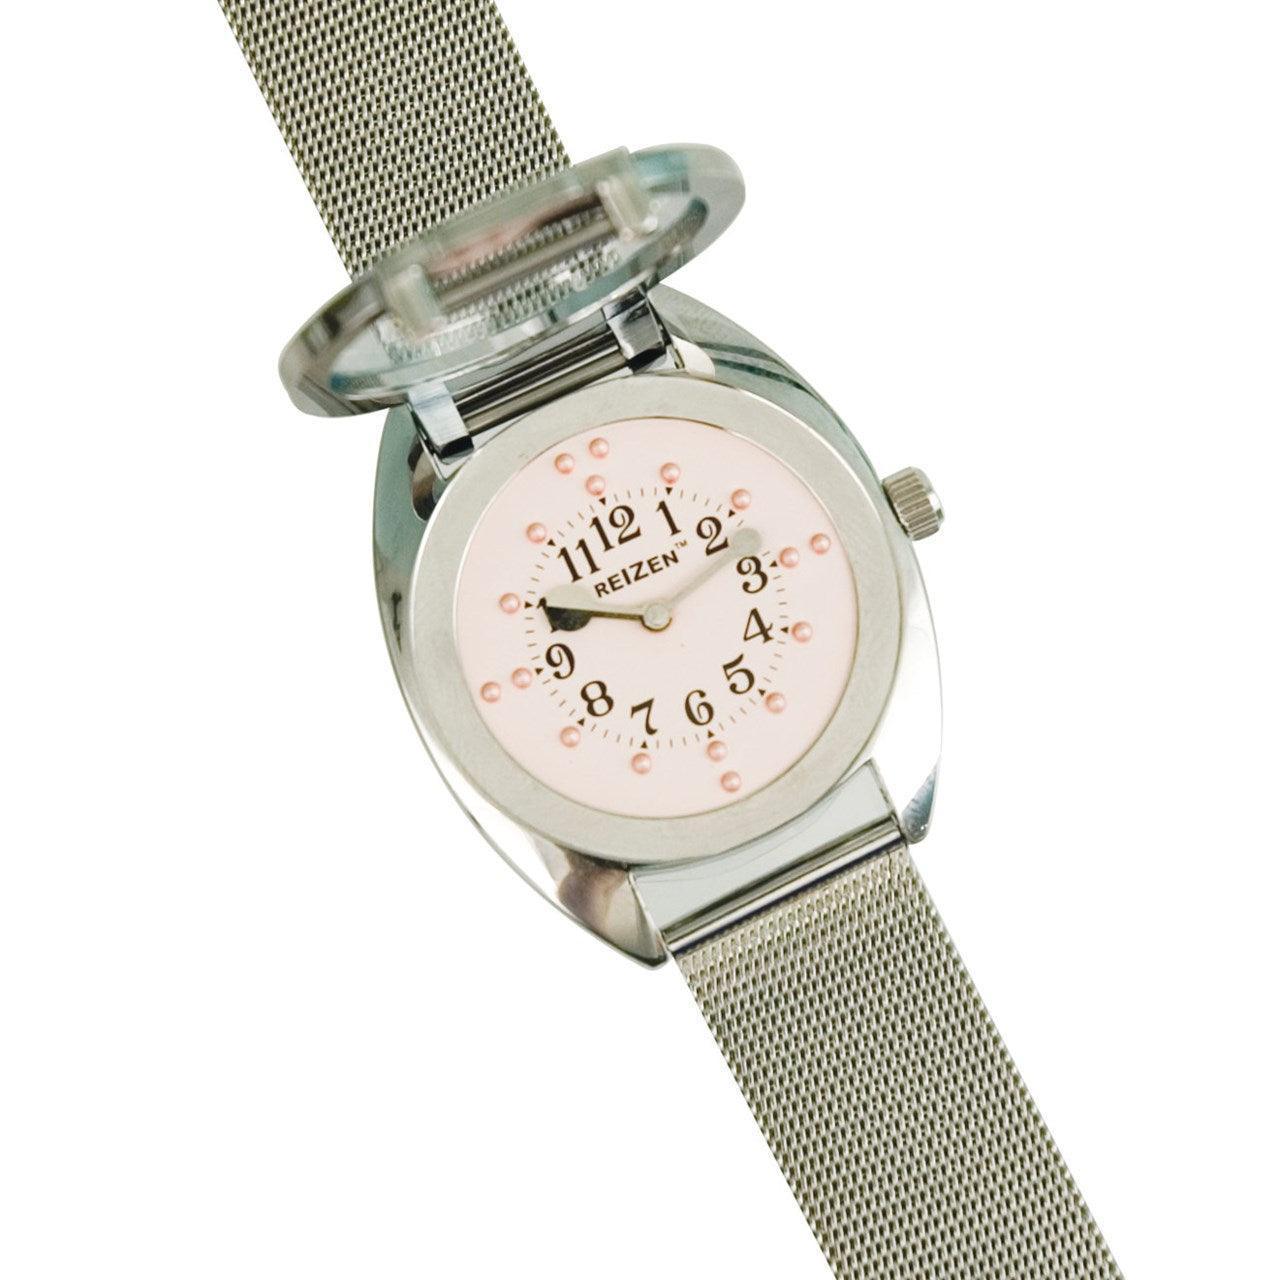 Ladies Braille Watch-Chrome-Steel Mesh Band-Pink Dial - The Low Vision Store